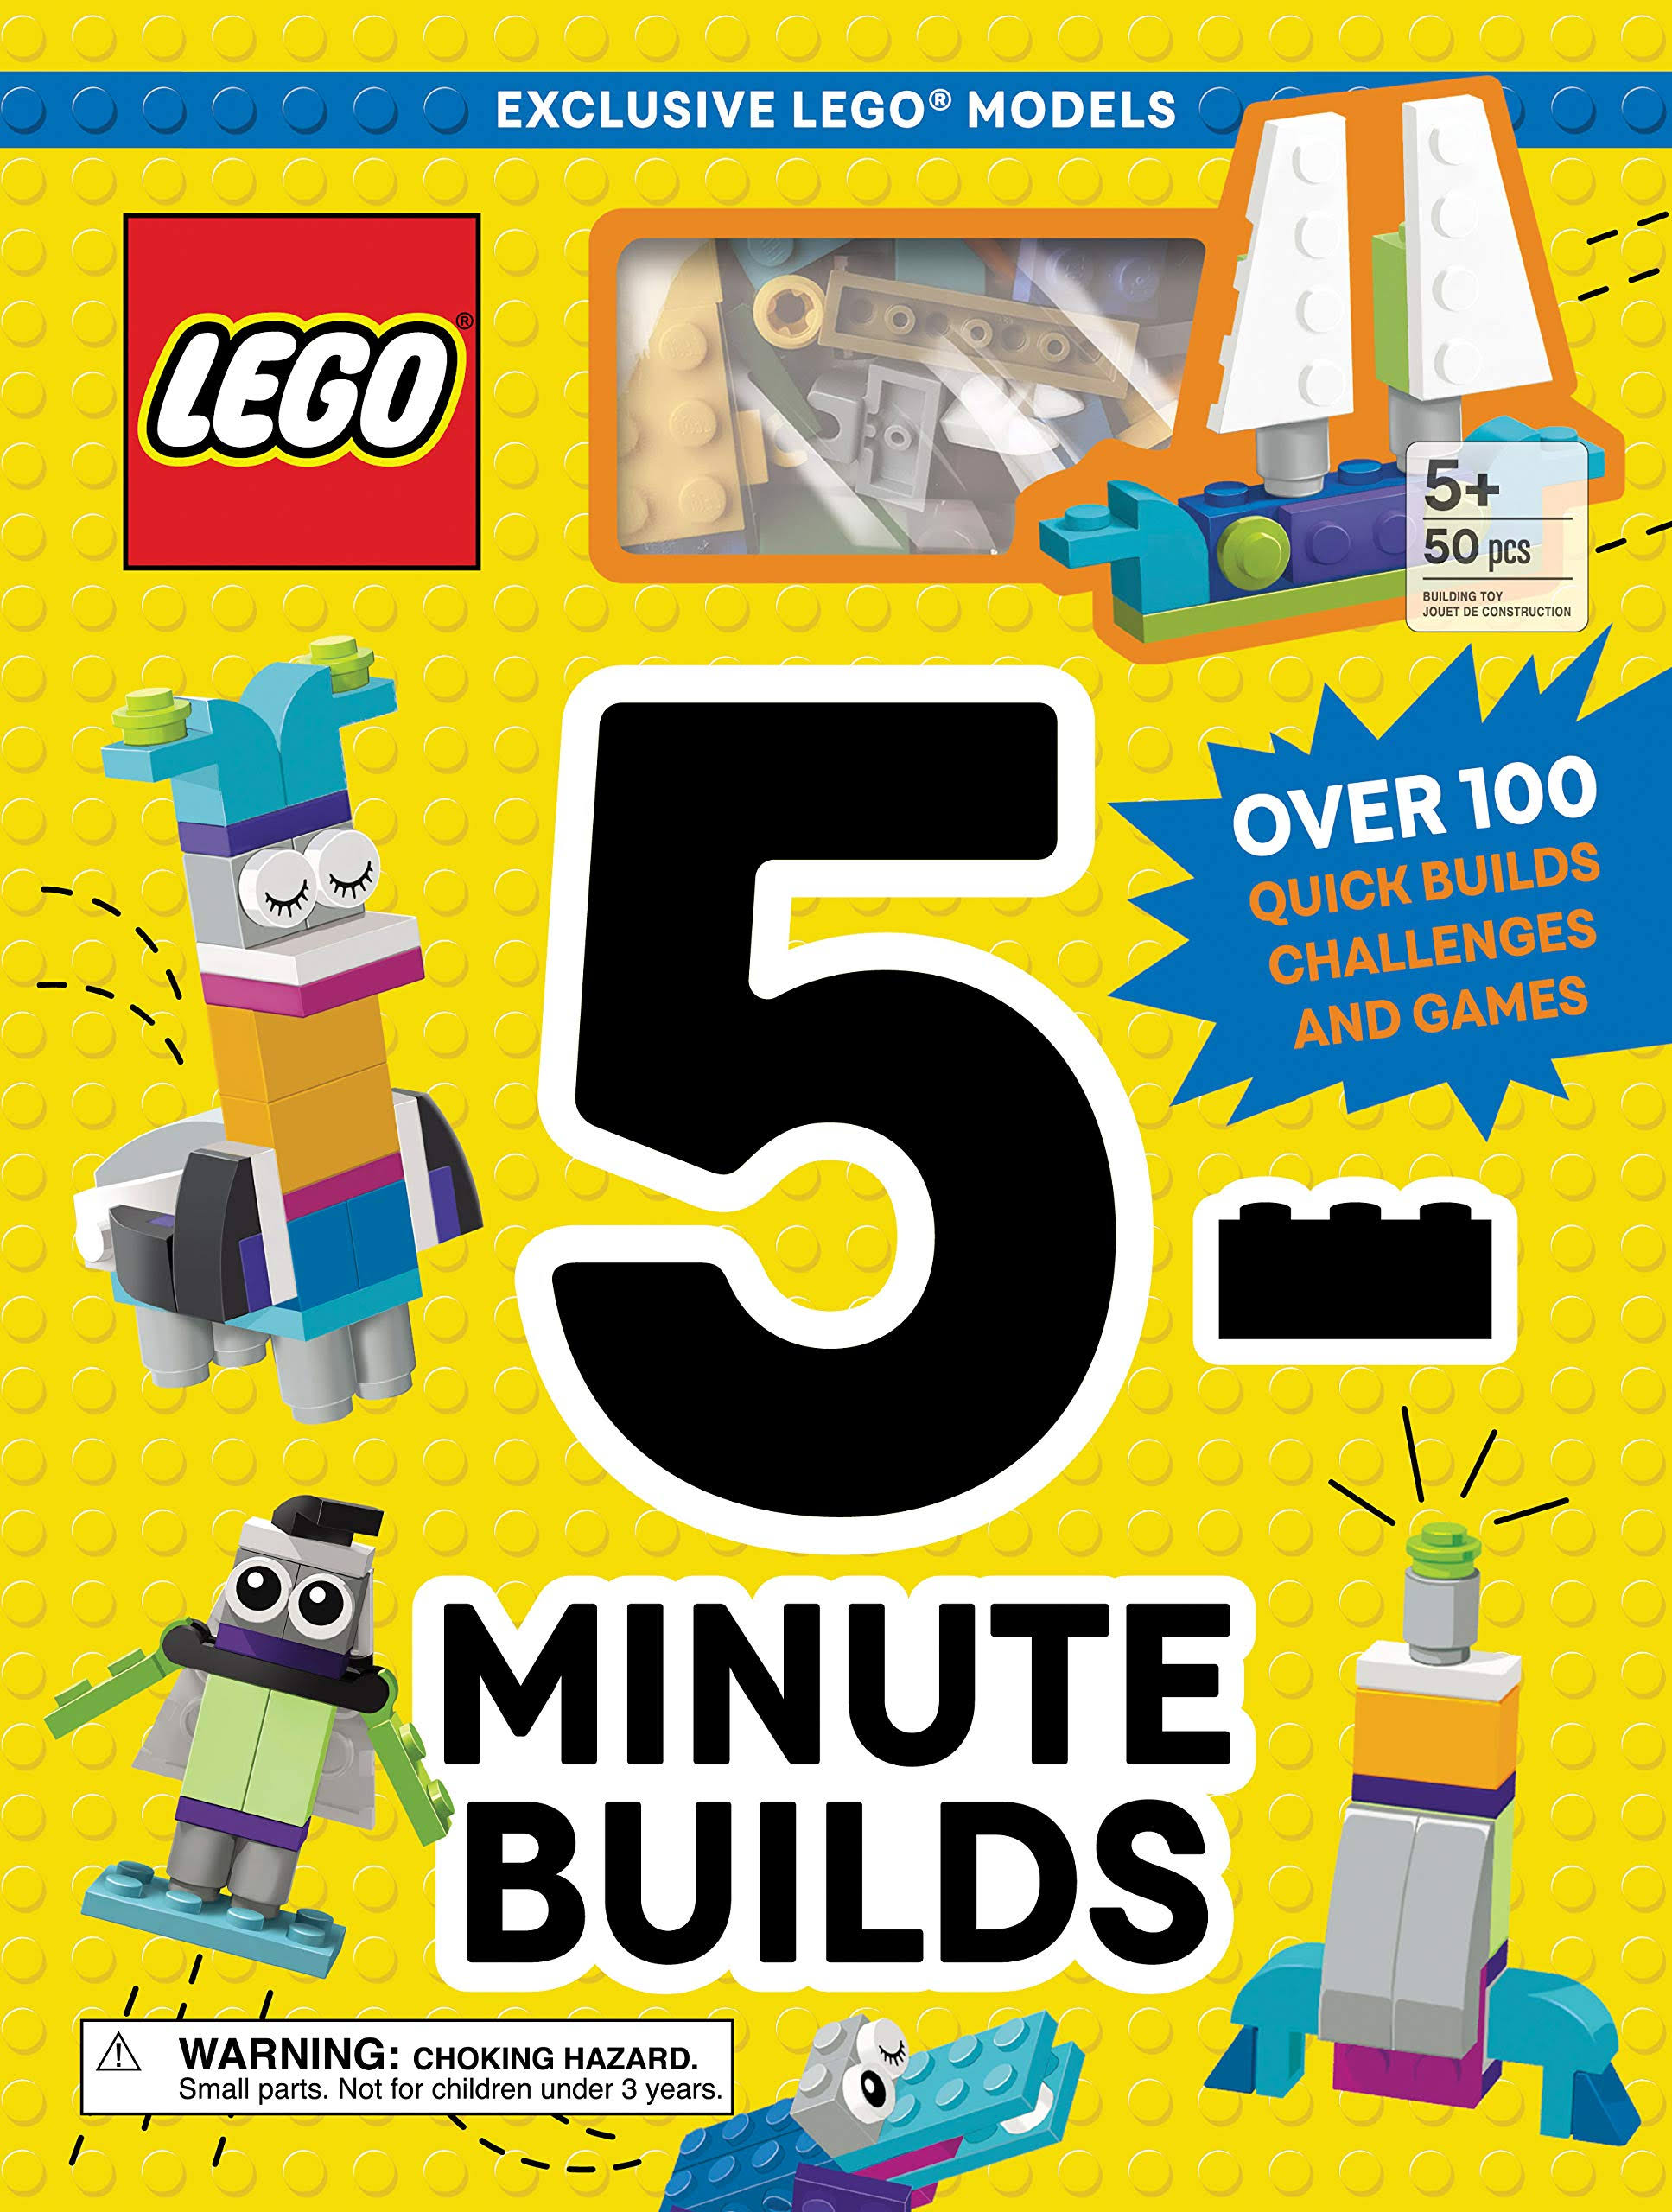 5-Minute LEGO Builds by LEGO Group